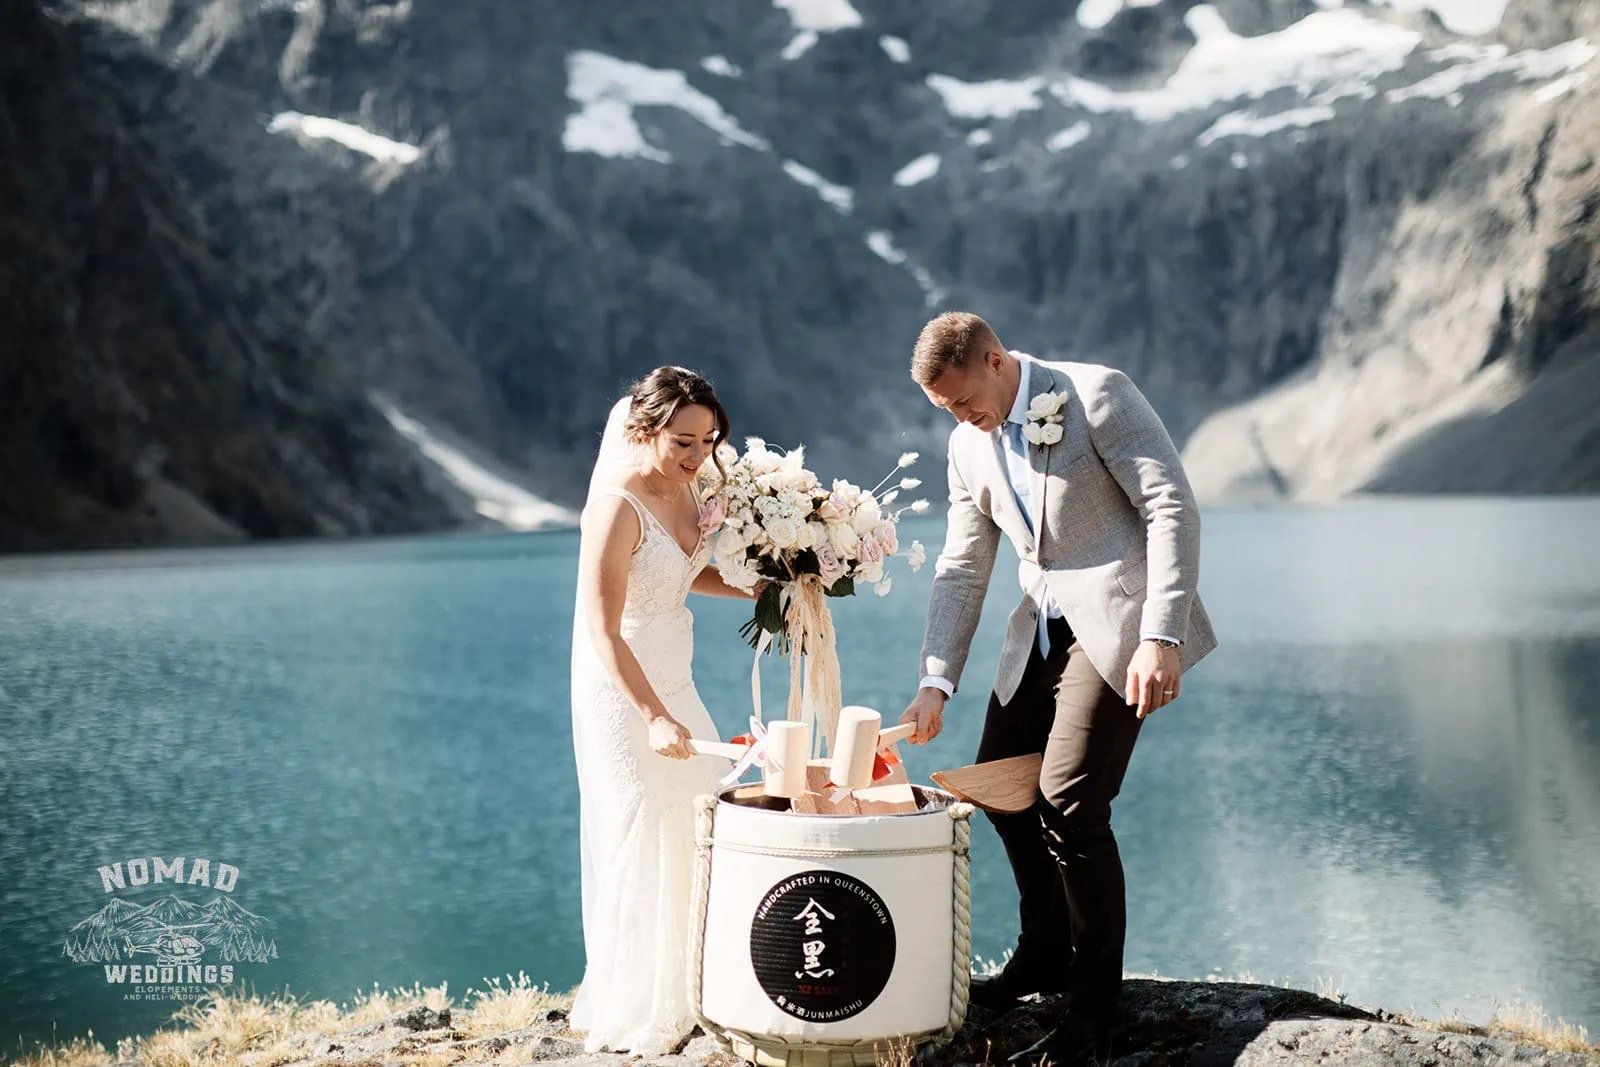 Amy & Eden's enchanting Heli Elopement Wedding at Lake Erskine with mountains in the background.